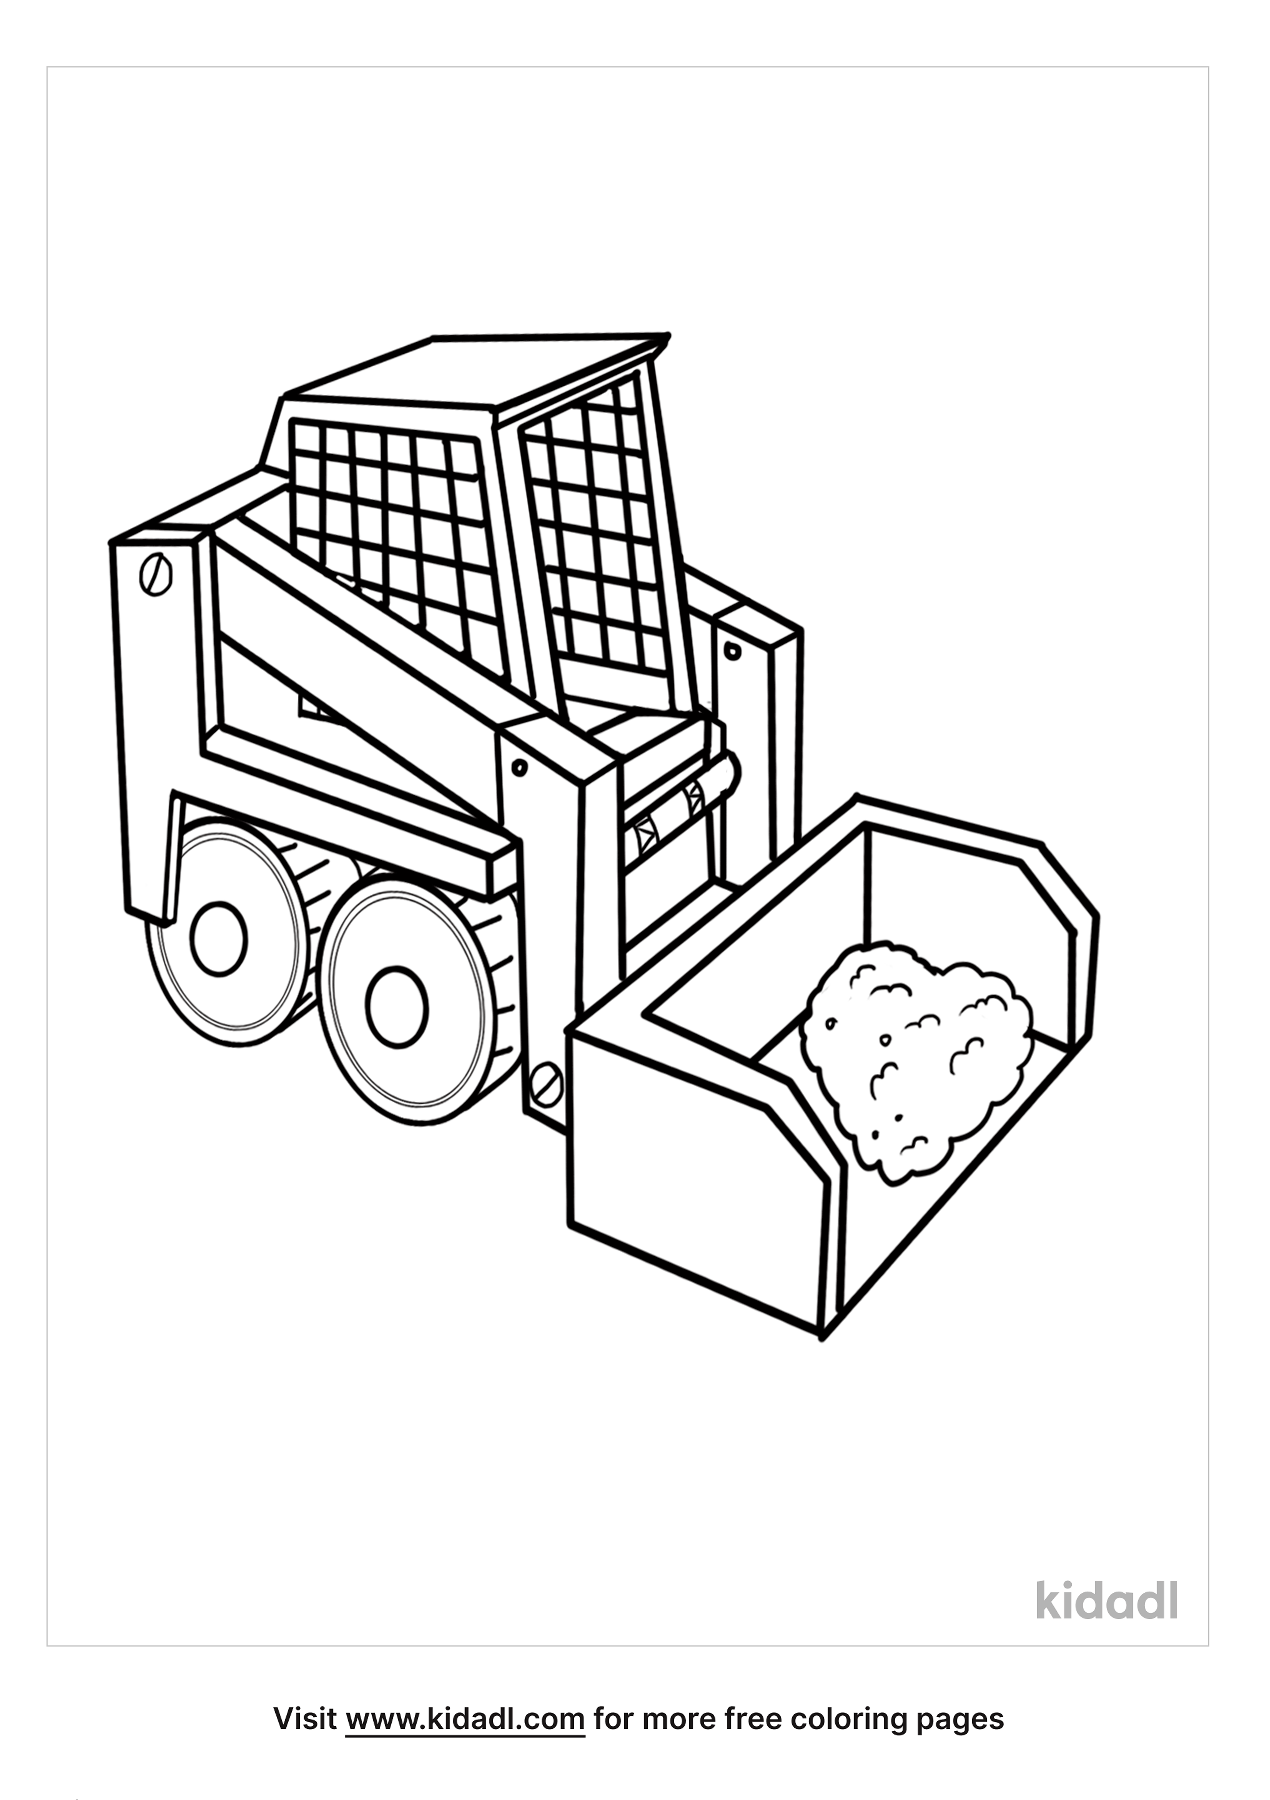 London Bus Coloring Pages | Free Vehicles Coloring Pages | Kidadl